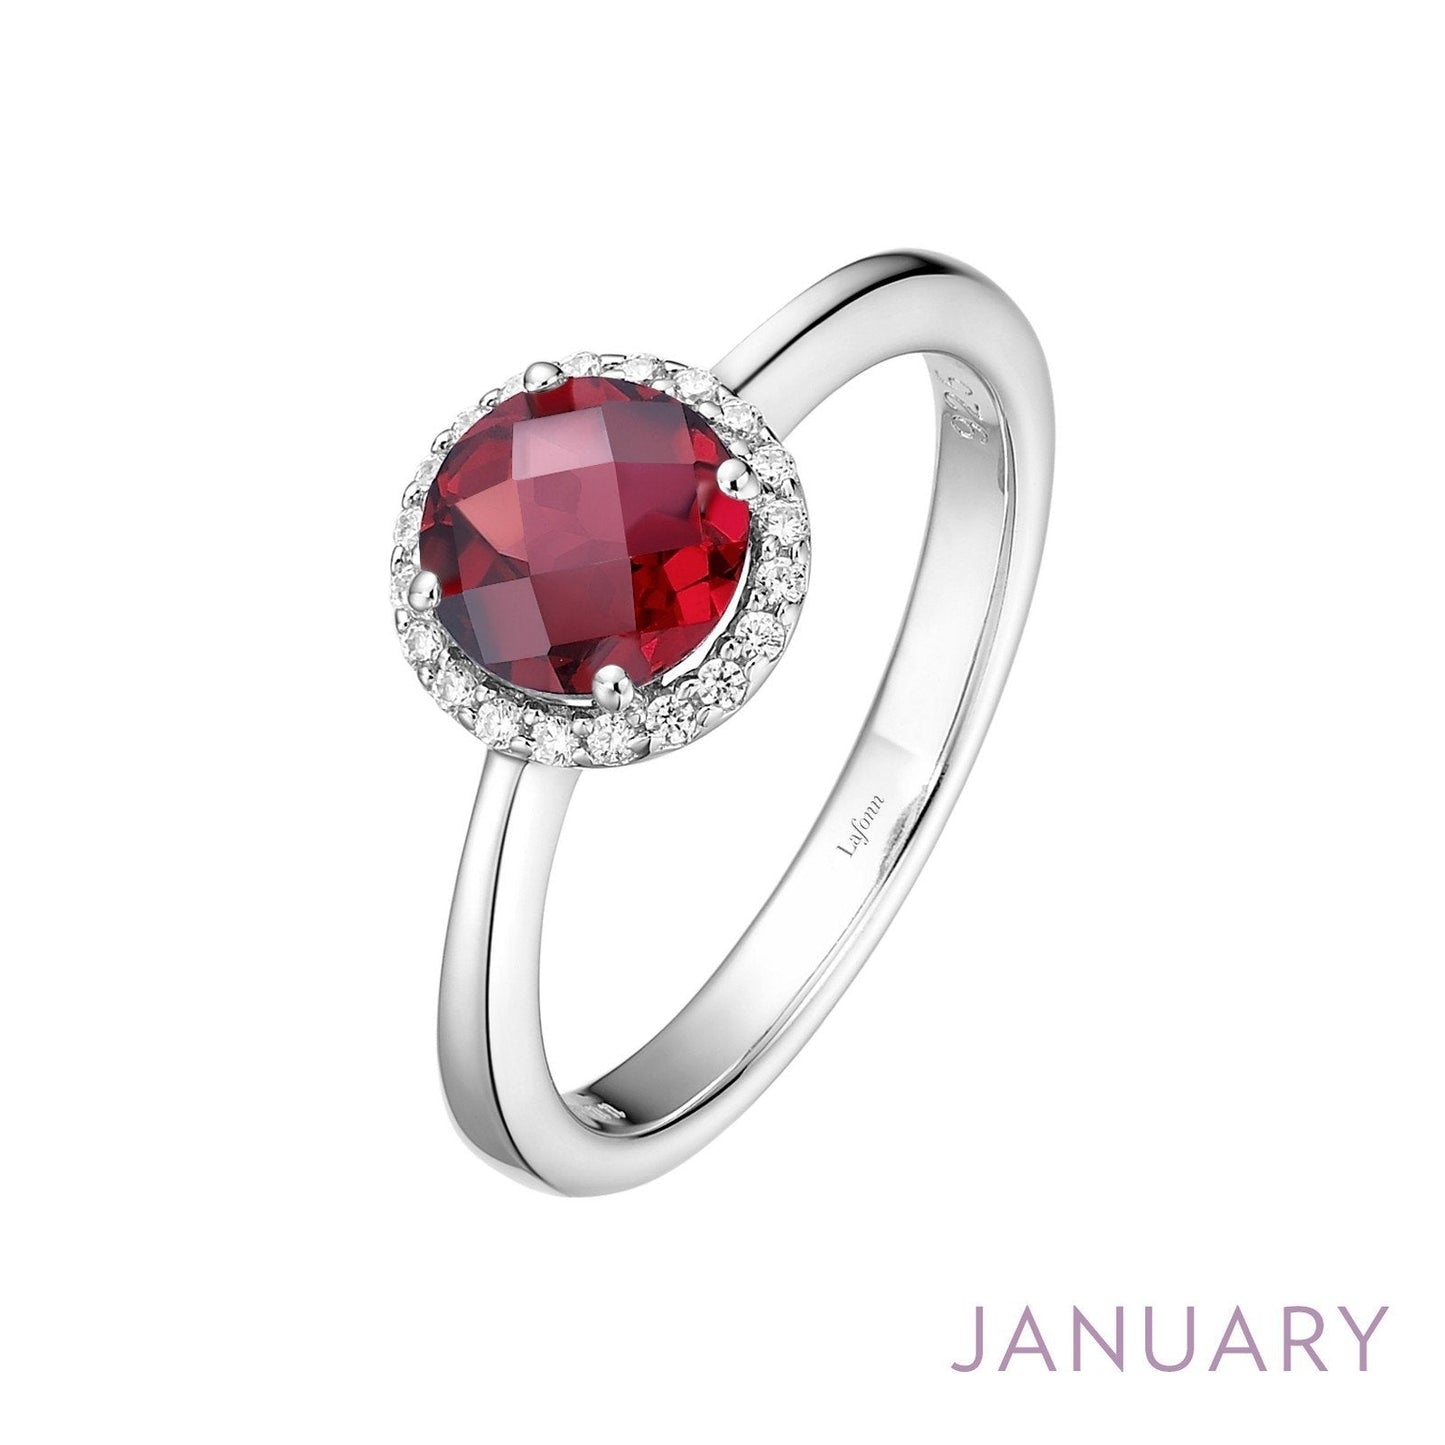 Load image into Gallery viewer, Lafonn January Birthstone Ring JANUARY RINGS Size 7 Platinum Appx CTW: 1.05 cts. Garnet Appx 0.85 cts.  Lassaire simulated diamonds: 0.20 cts. CTS 
